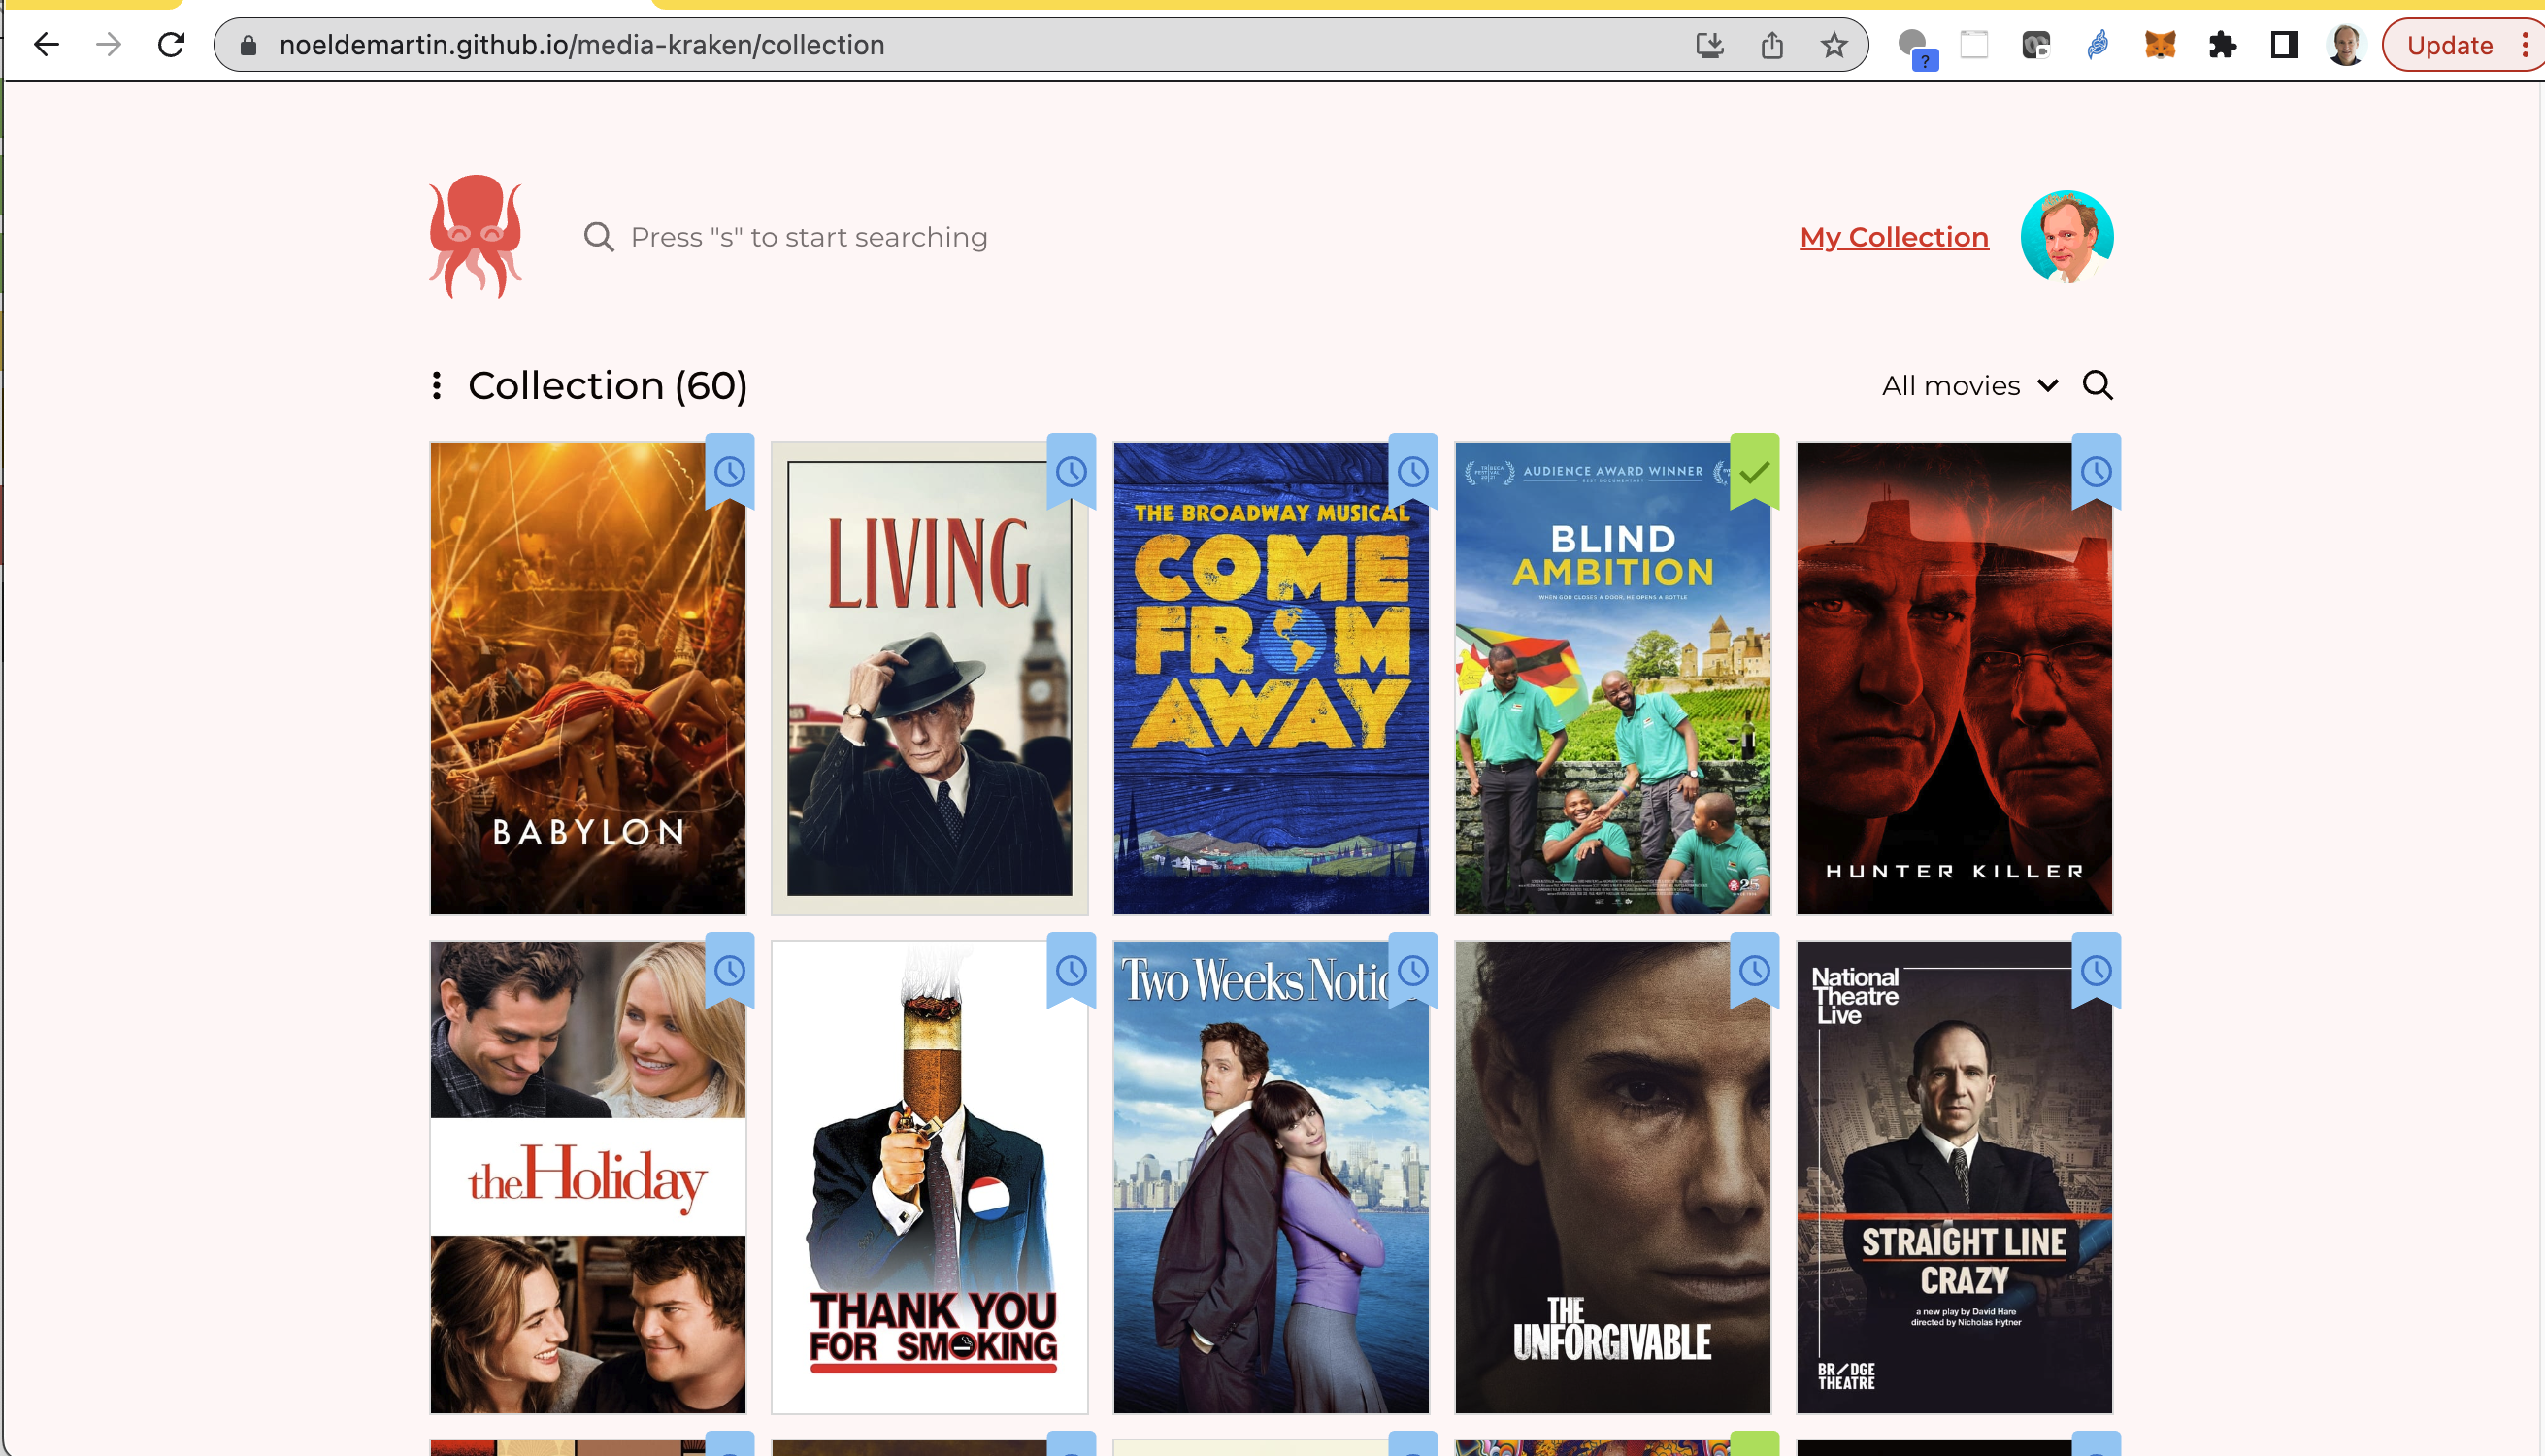 A screen shot of the Meda Kraken App showing a collectio of movies by their DVD box picture